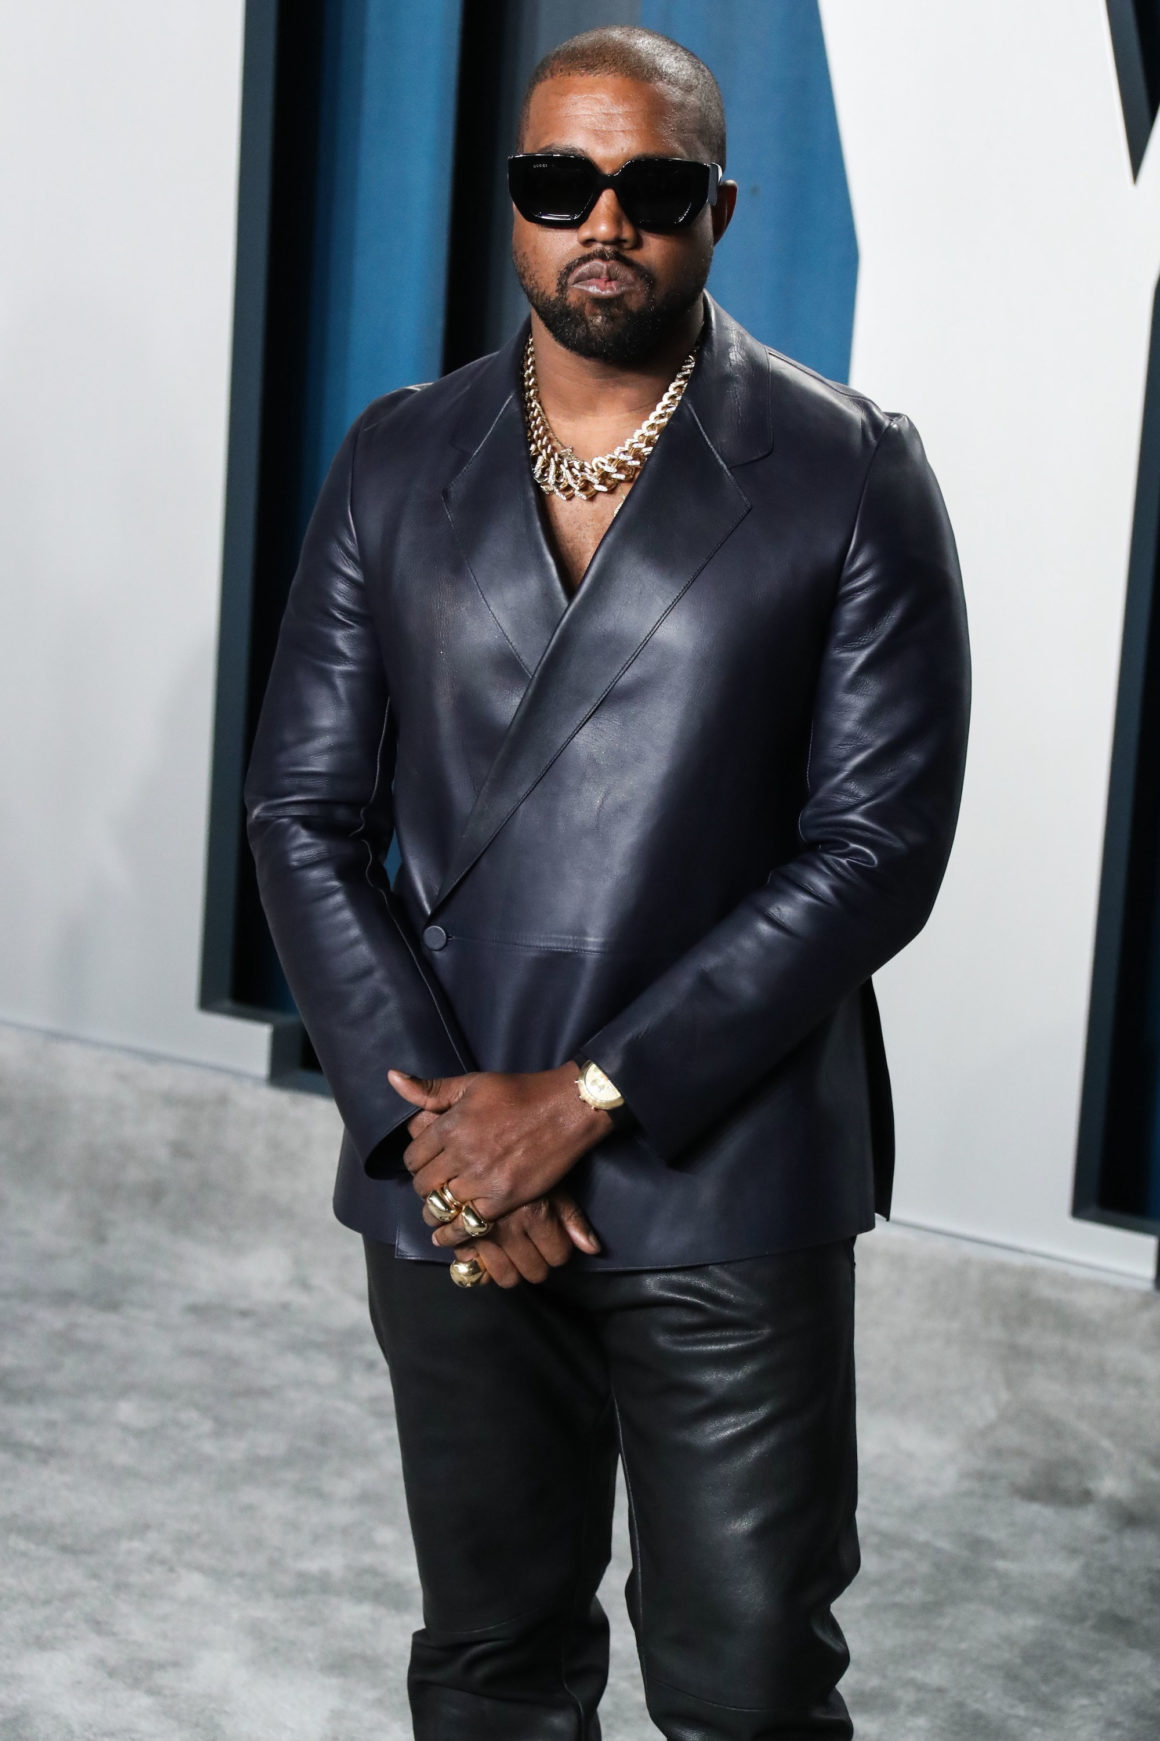 Kanye West Is Now Officially A Billionaire According To Forbes ...